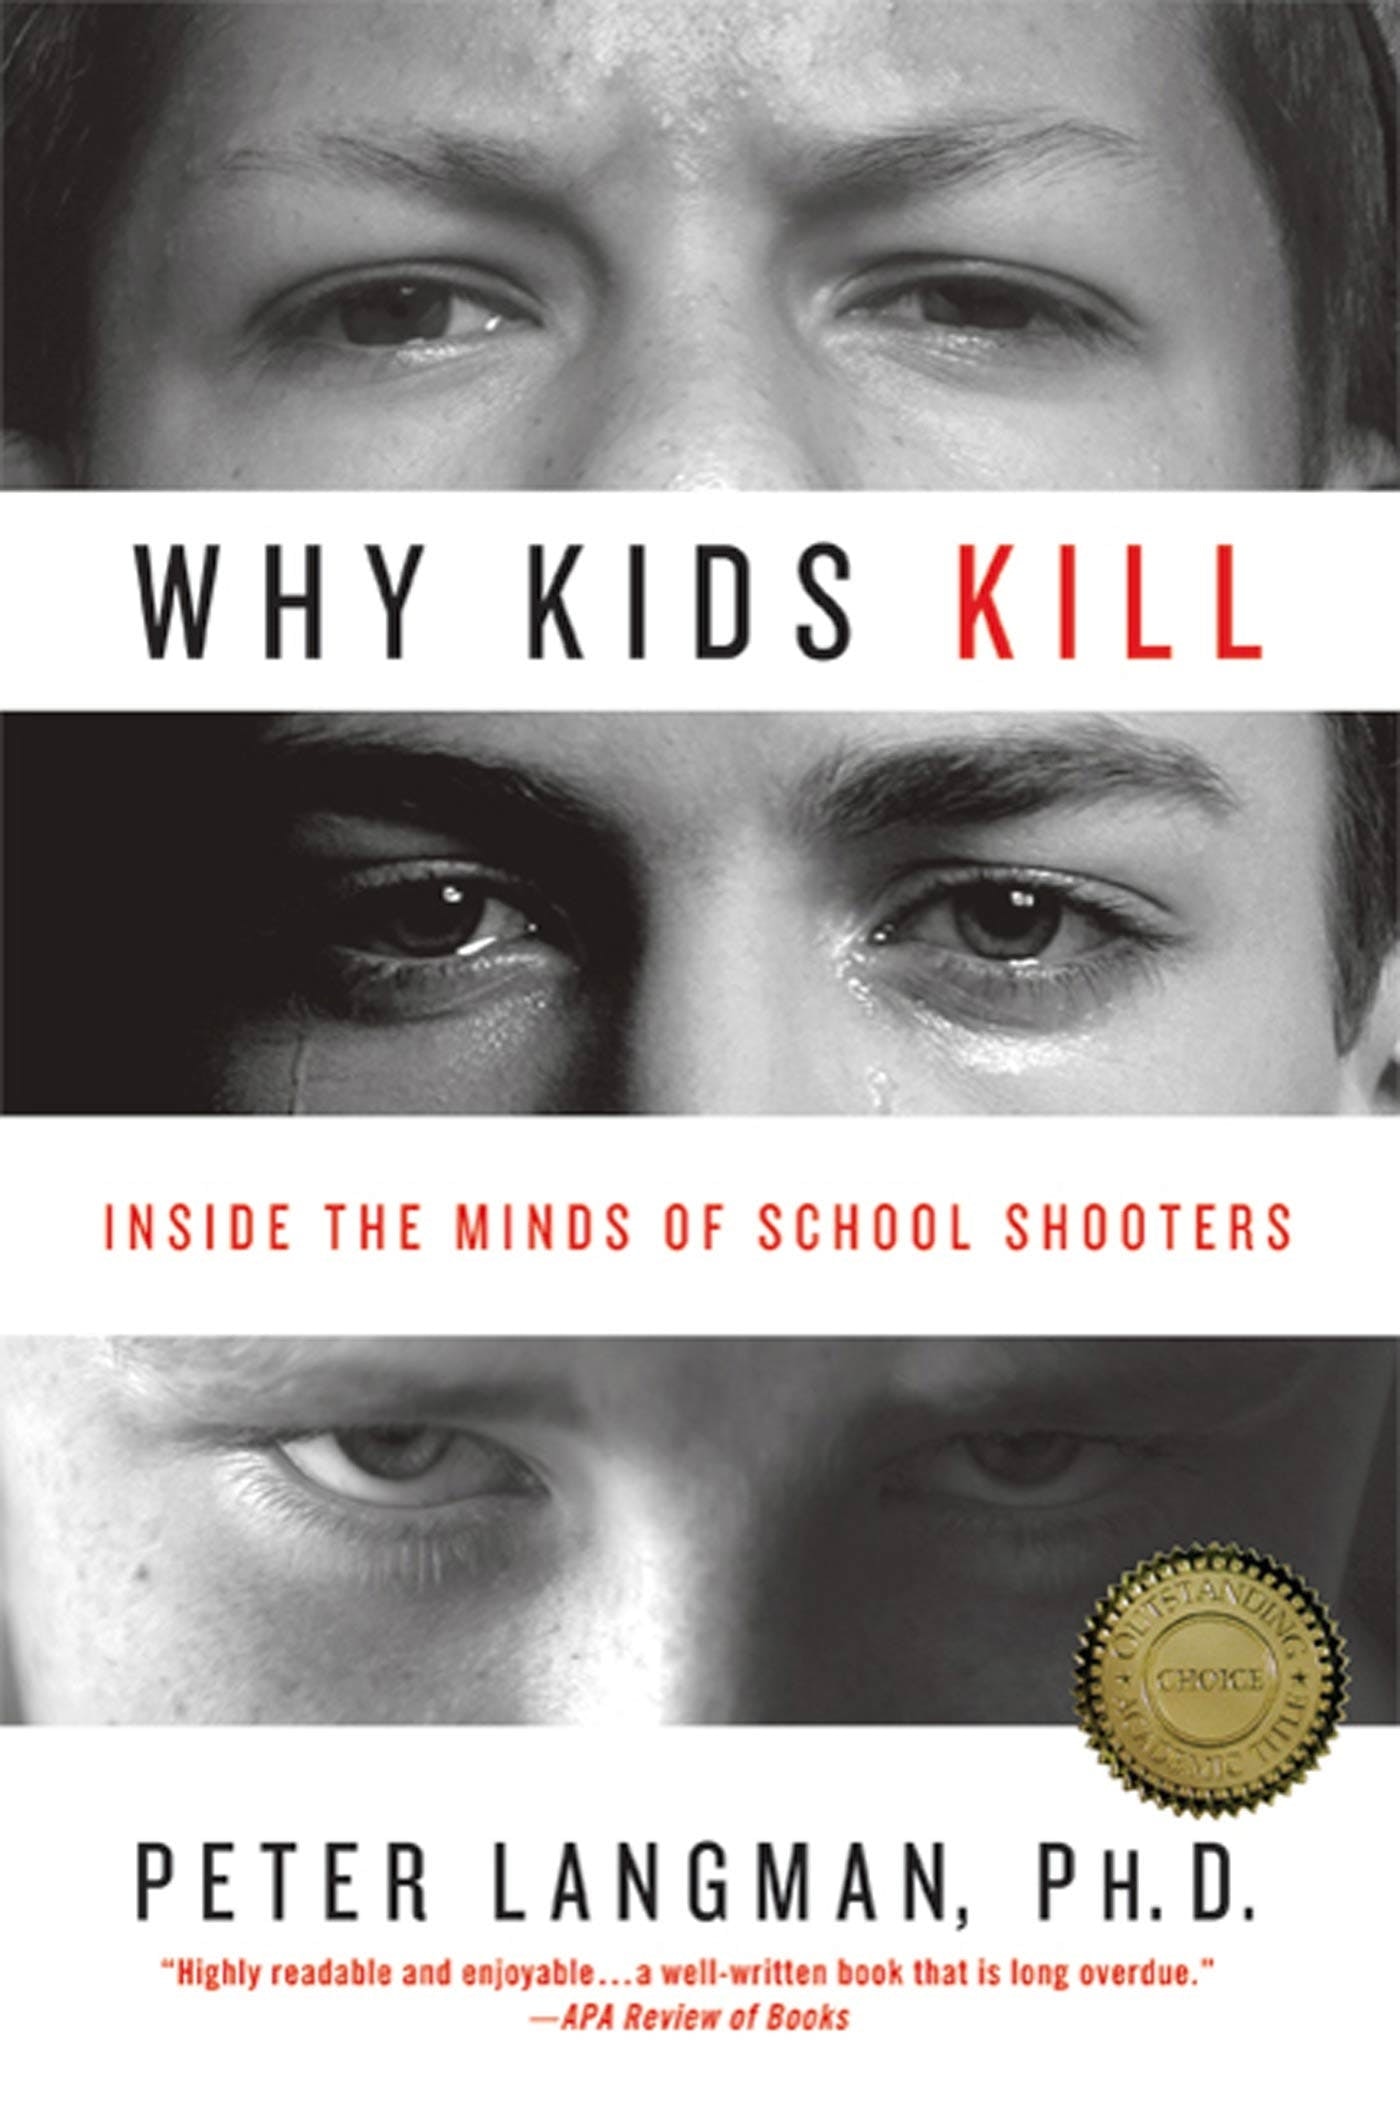 Book “Why Kids Kill” by Peter Langman — August 3, 2010